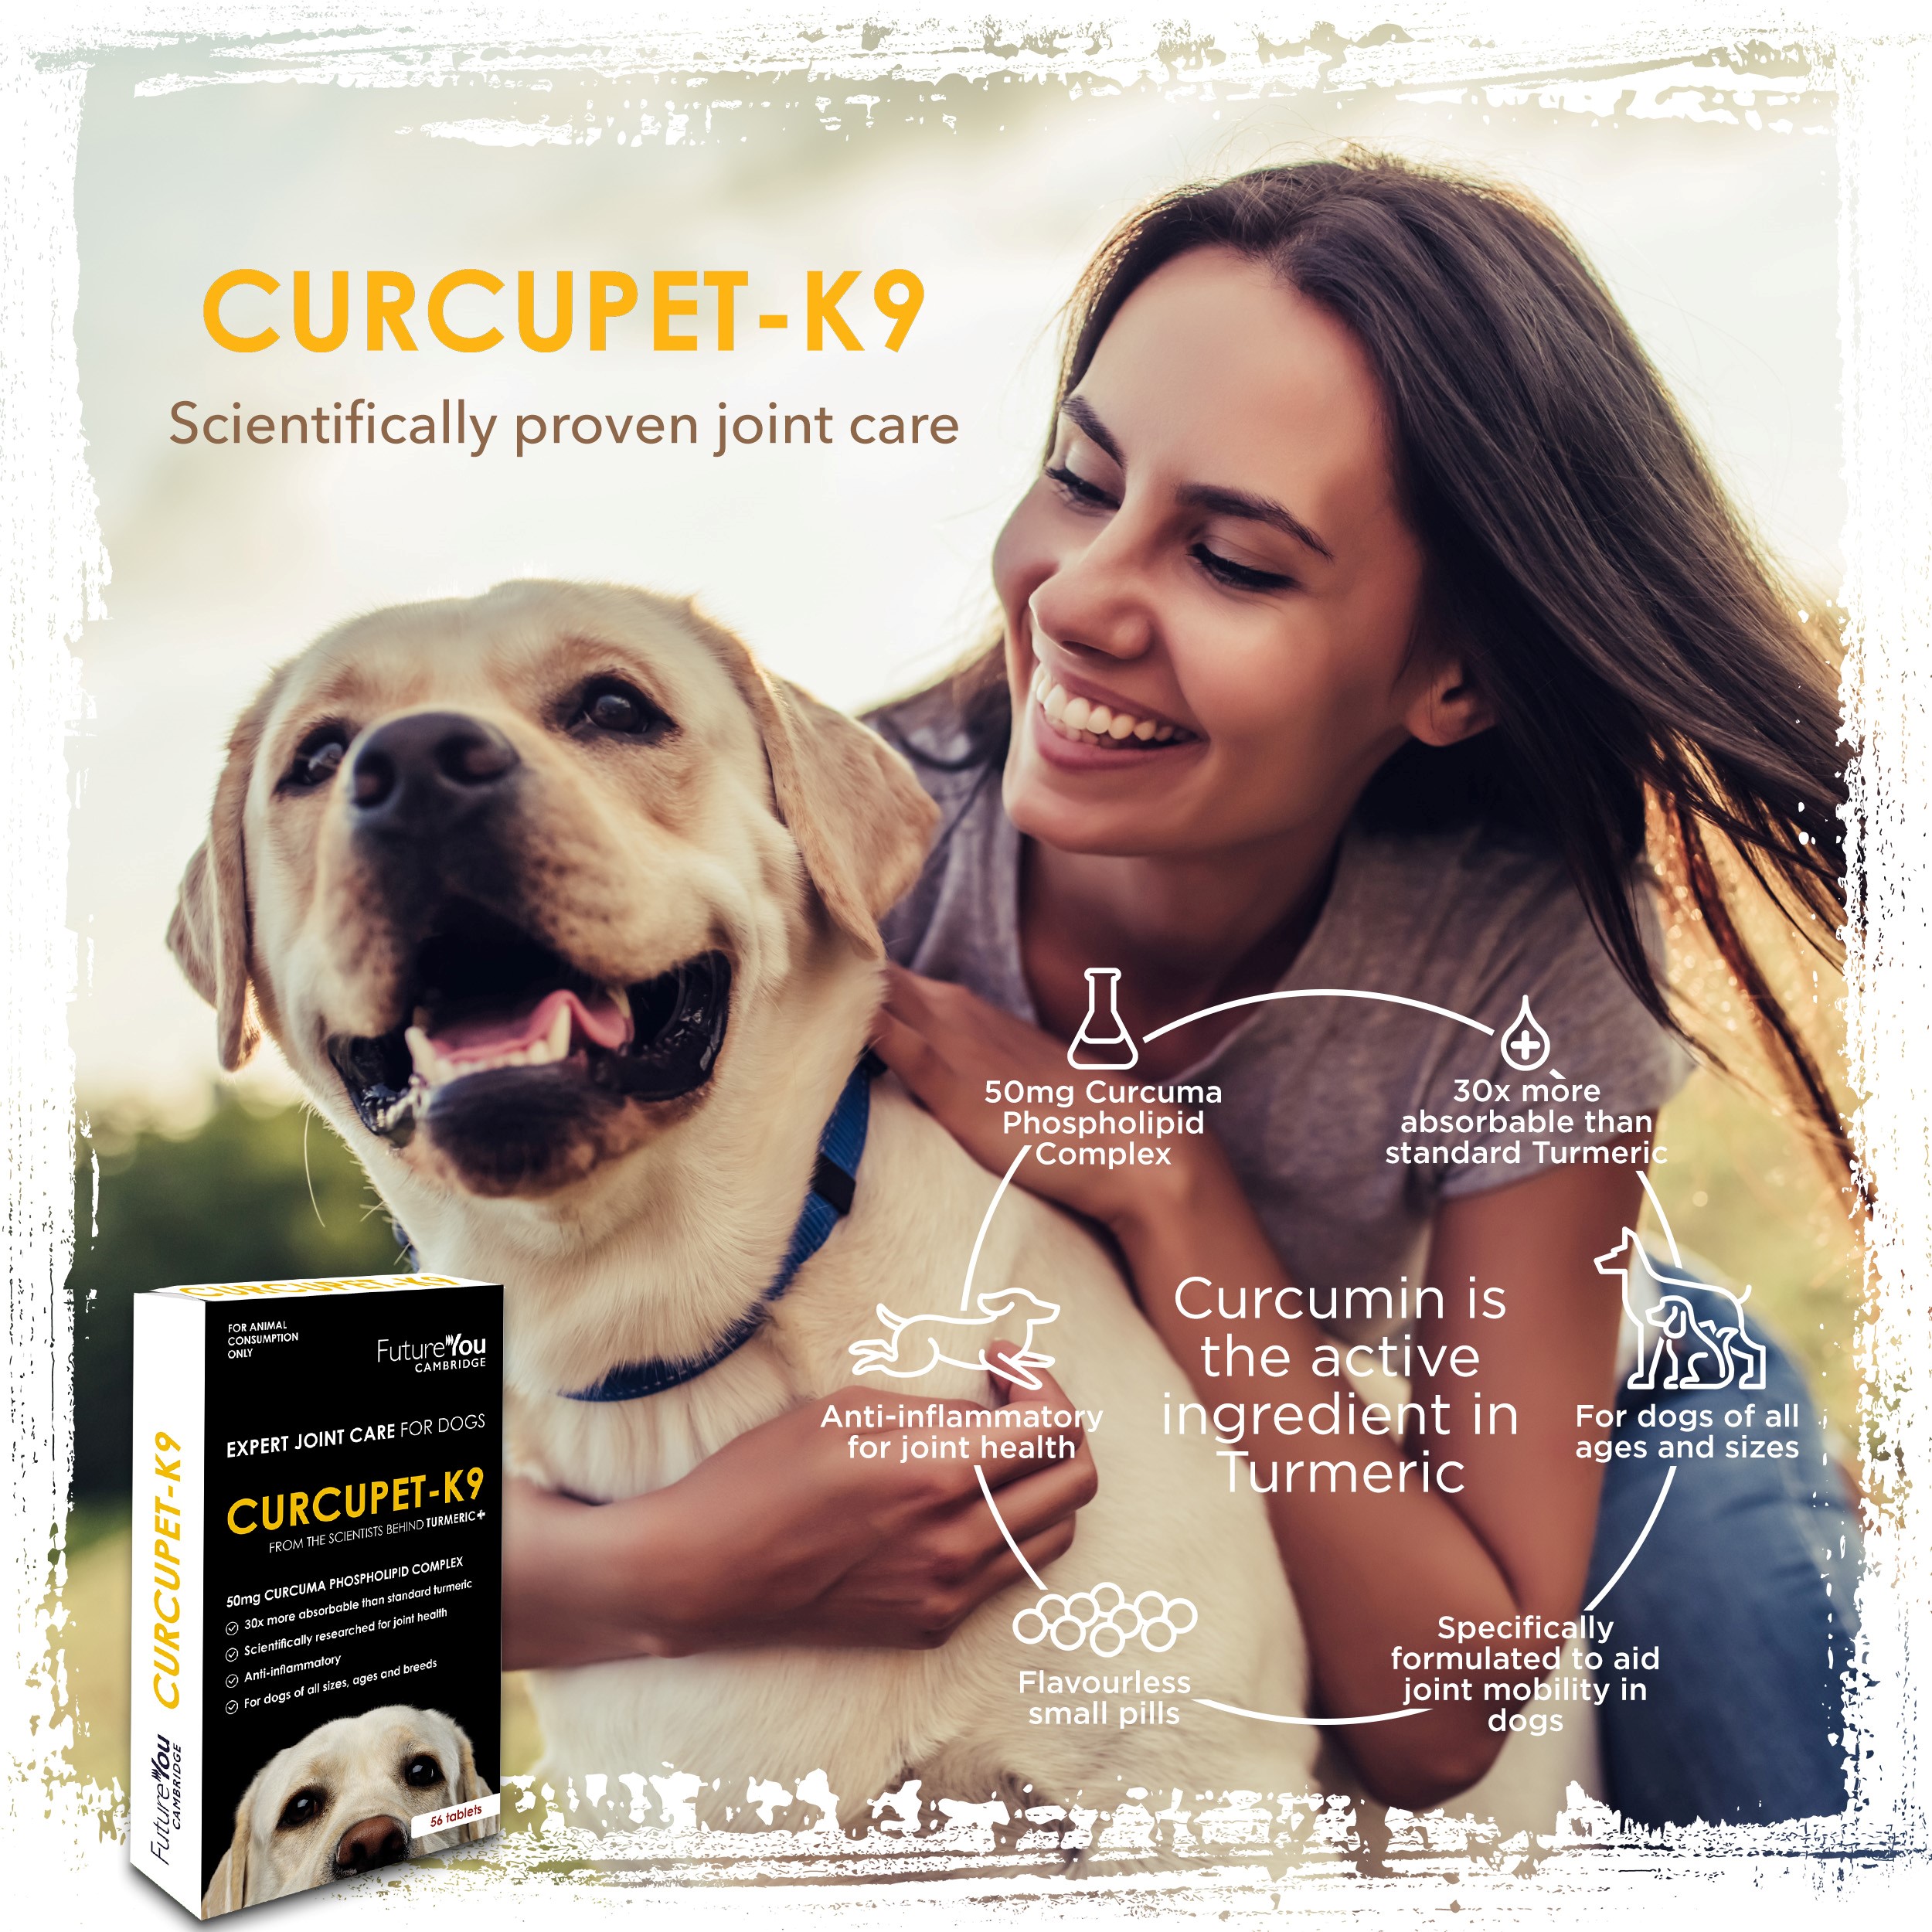 Curcupet-K9 joint care for dogs